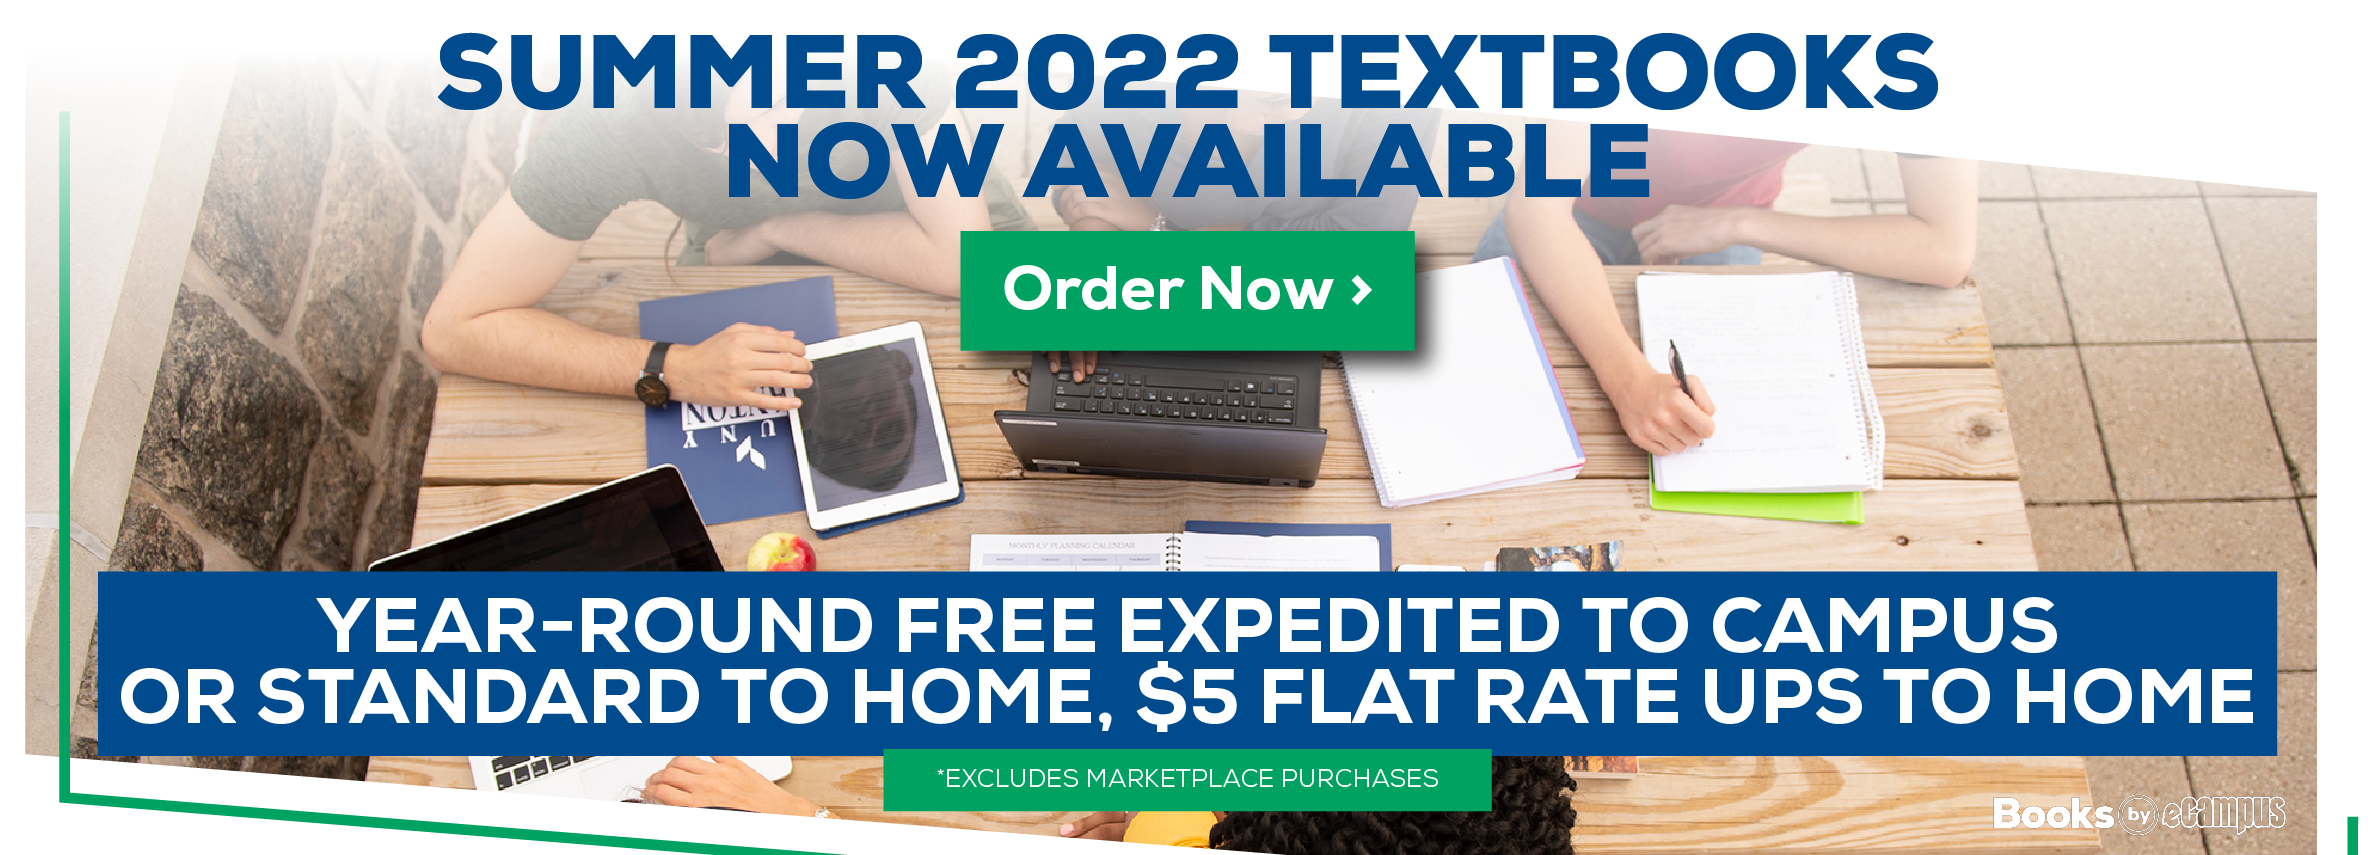 Summer 2022 textbooks now available. order now. Year-Round free expedited to campus or standard to home, $5 flat rate UPS to home. excludes marketplace purchases